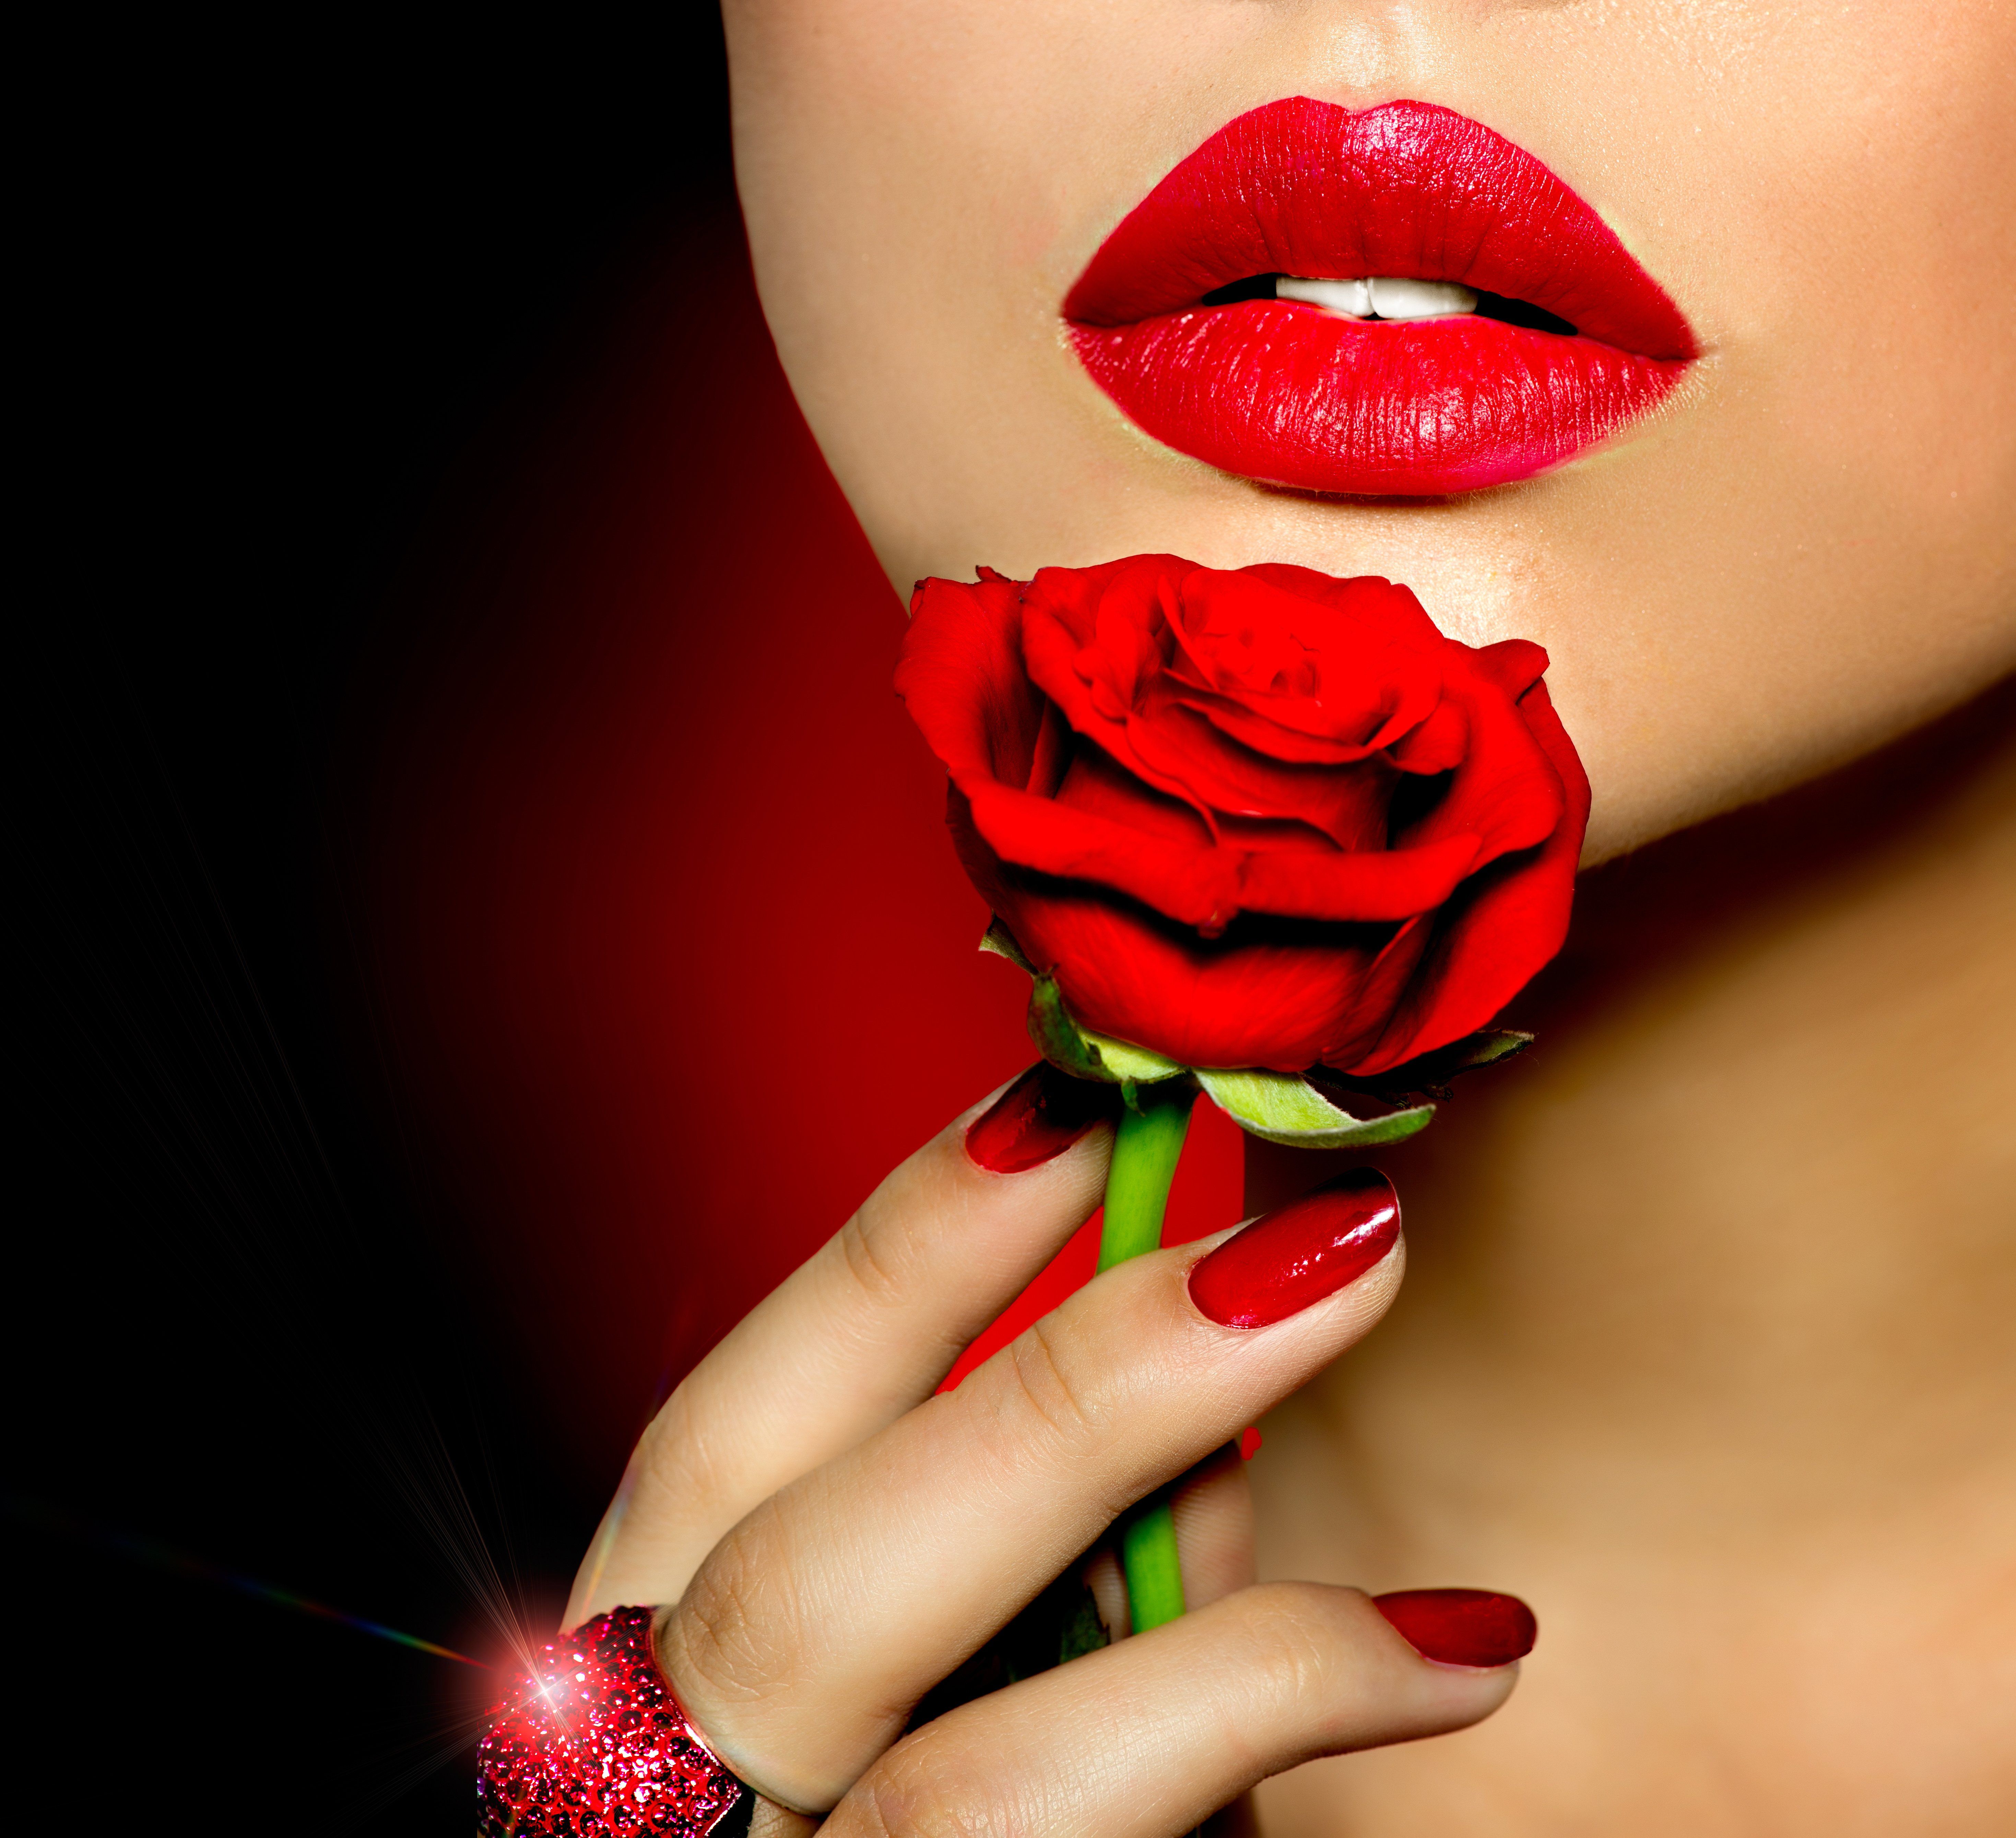 spettacular, Lips, Rose, One, Beauty, Lovely, Passion, Red, Lips, Nail, Love, Women, Red, Roses Wallpaper HD / Desktop and Mobile Background